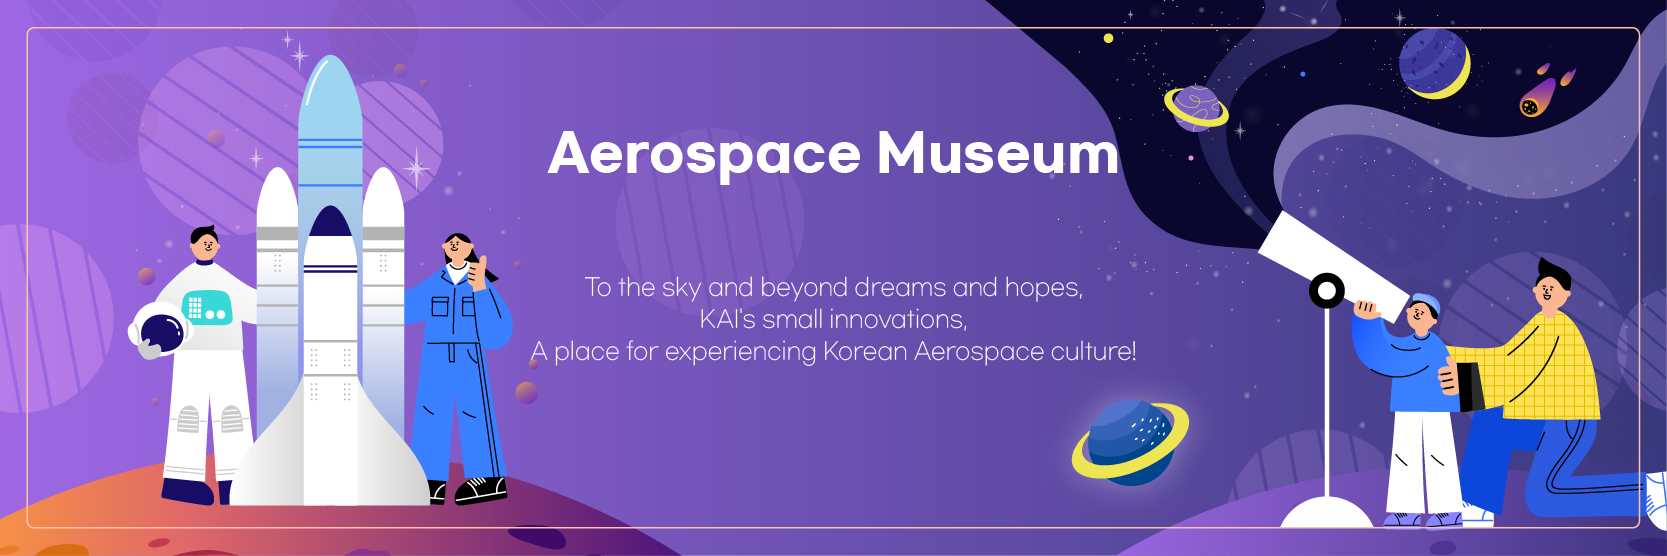 Aerospace Museum - To the sky and beyond dreams and hopes, KAI's small innovations, A place for experiencing Korean Aerospace culture!